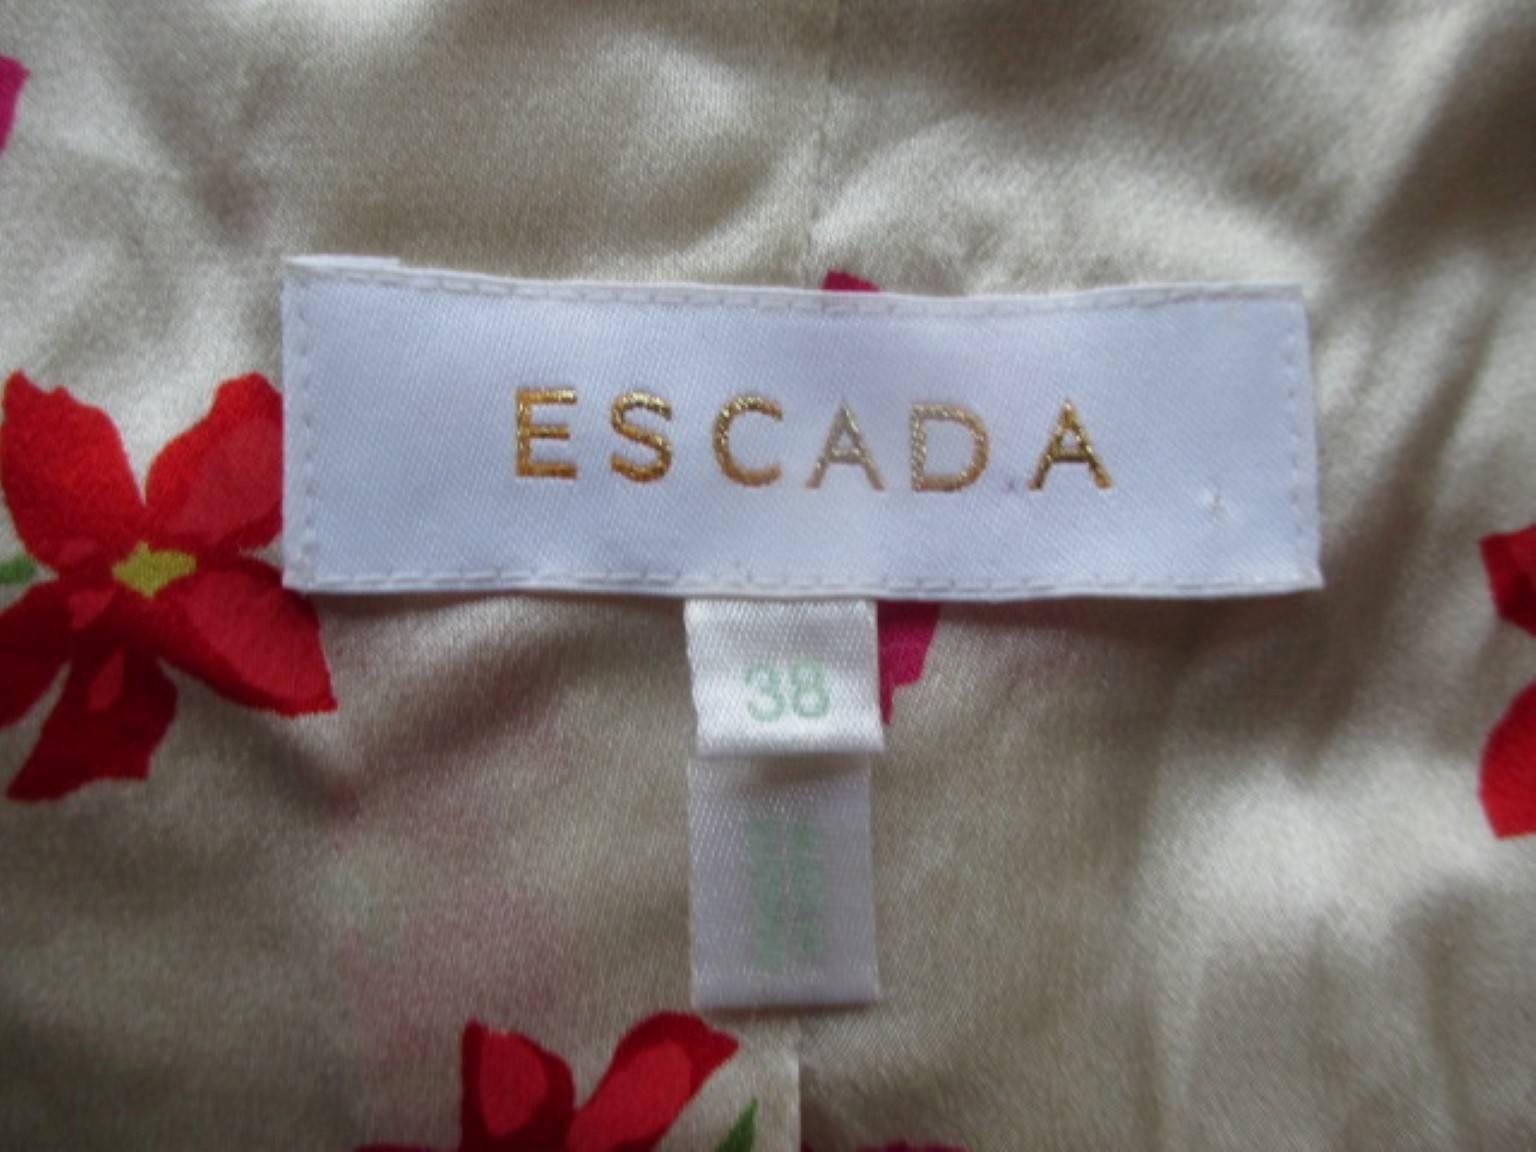 This Escada jacket has a pure silk matching flowers lining, 3 closing hooks and 2 pink loops for a belt at the waist.
size fits like US 8/EU 38
This jacket is in good condition, a few times worn.
Material:  47% cotton/5%